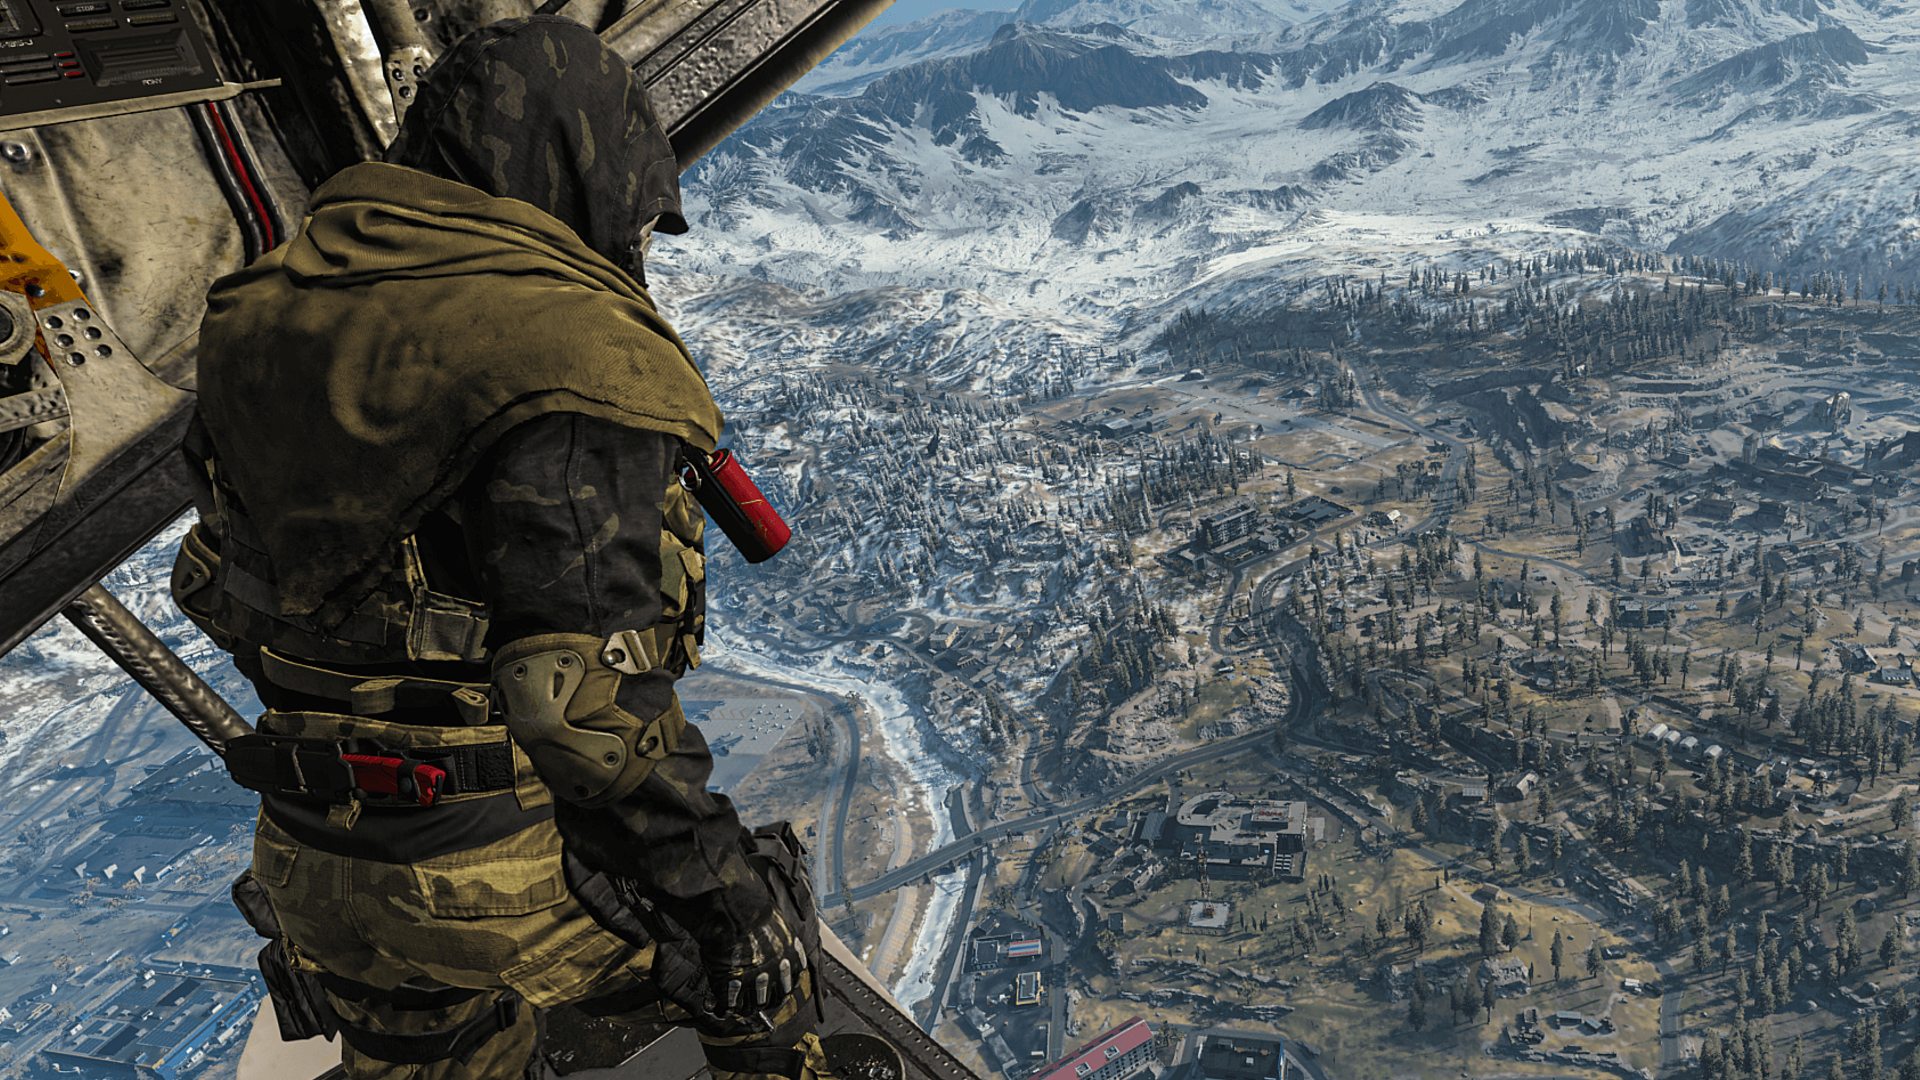 Warzone Season 3 map changes Verdansk: A single operator looks down at Verdansk from the open cargo bay door of a plane.